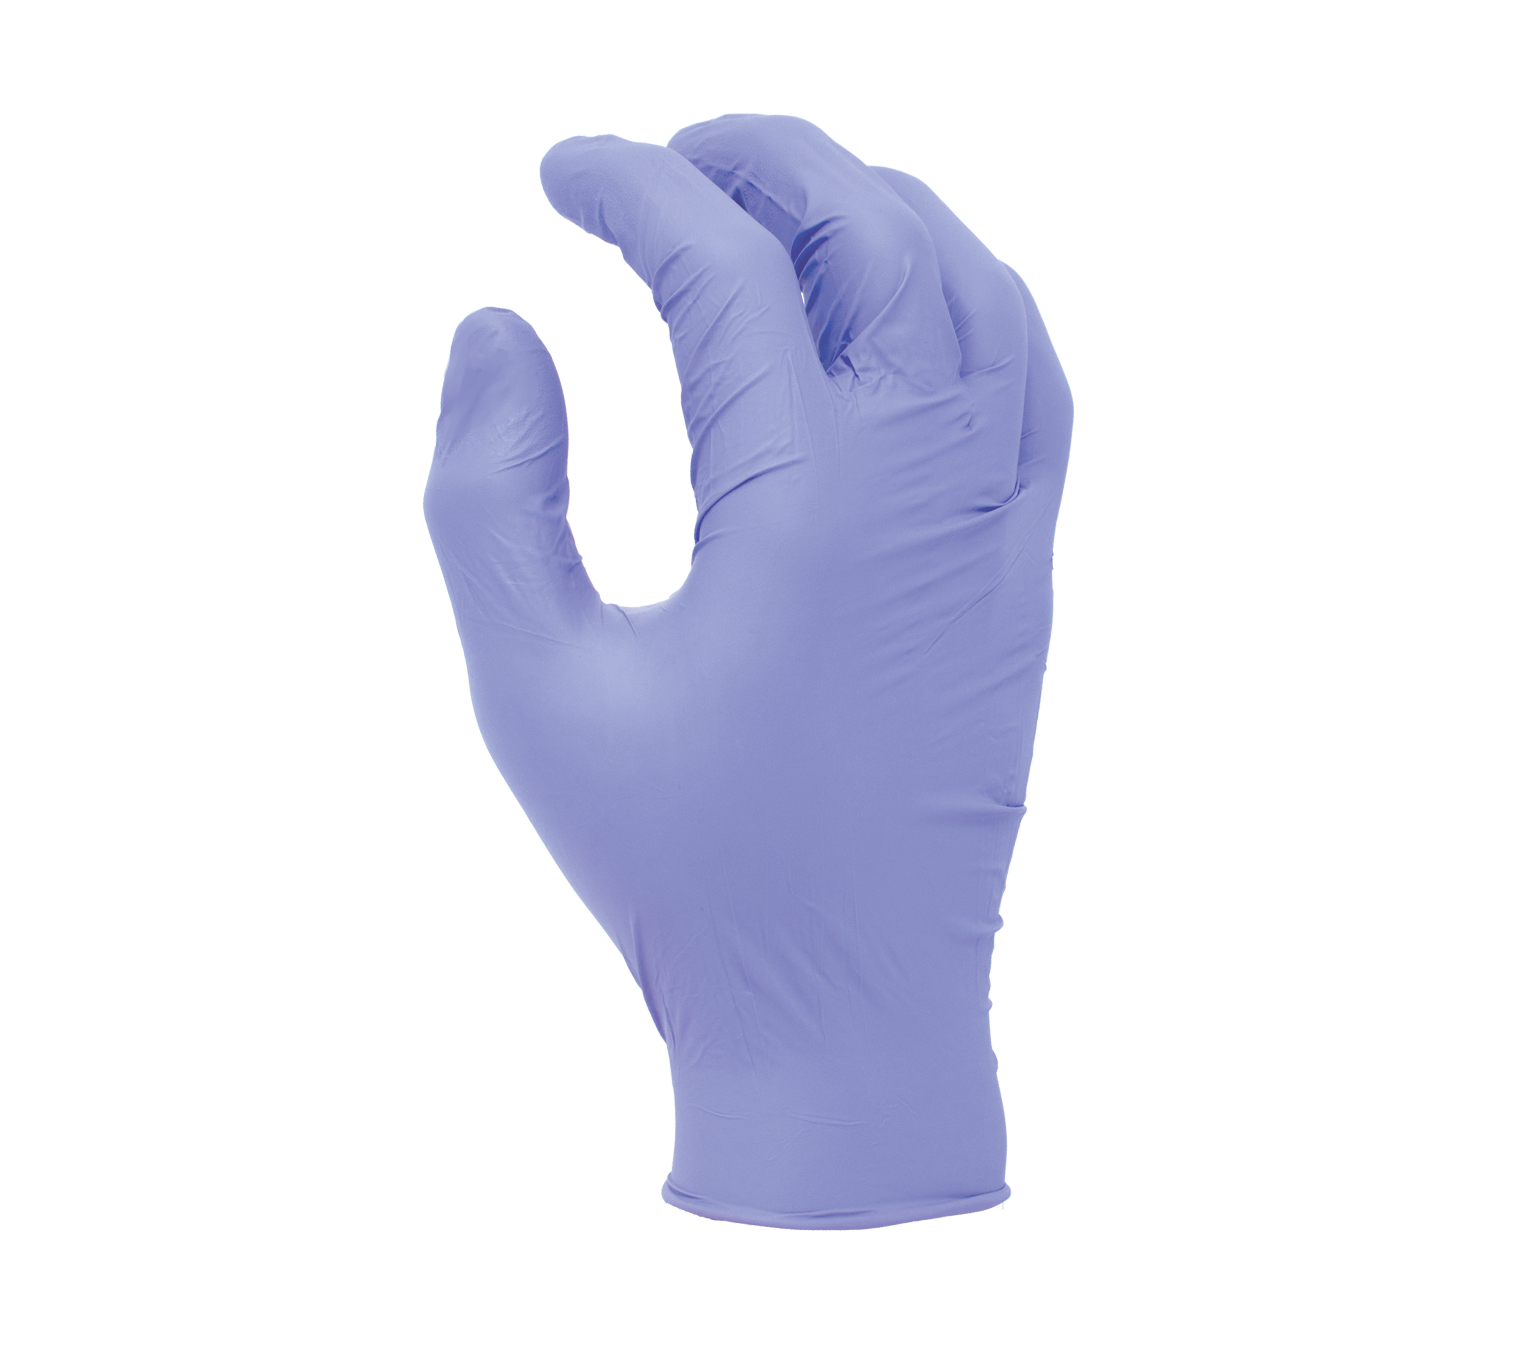 3.5 mil Ruby Blue Nitrile Disposable Gloves, 9 1/2" length, Powder-free, textured finish, industrial grade